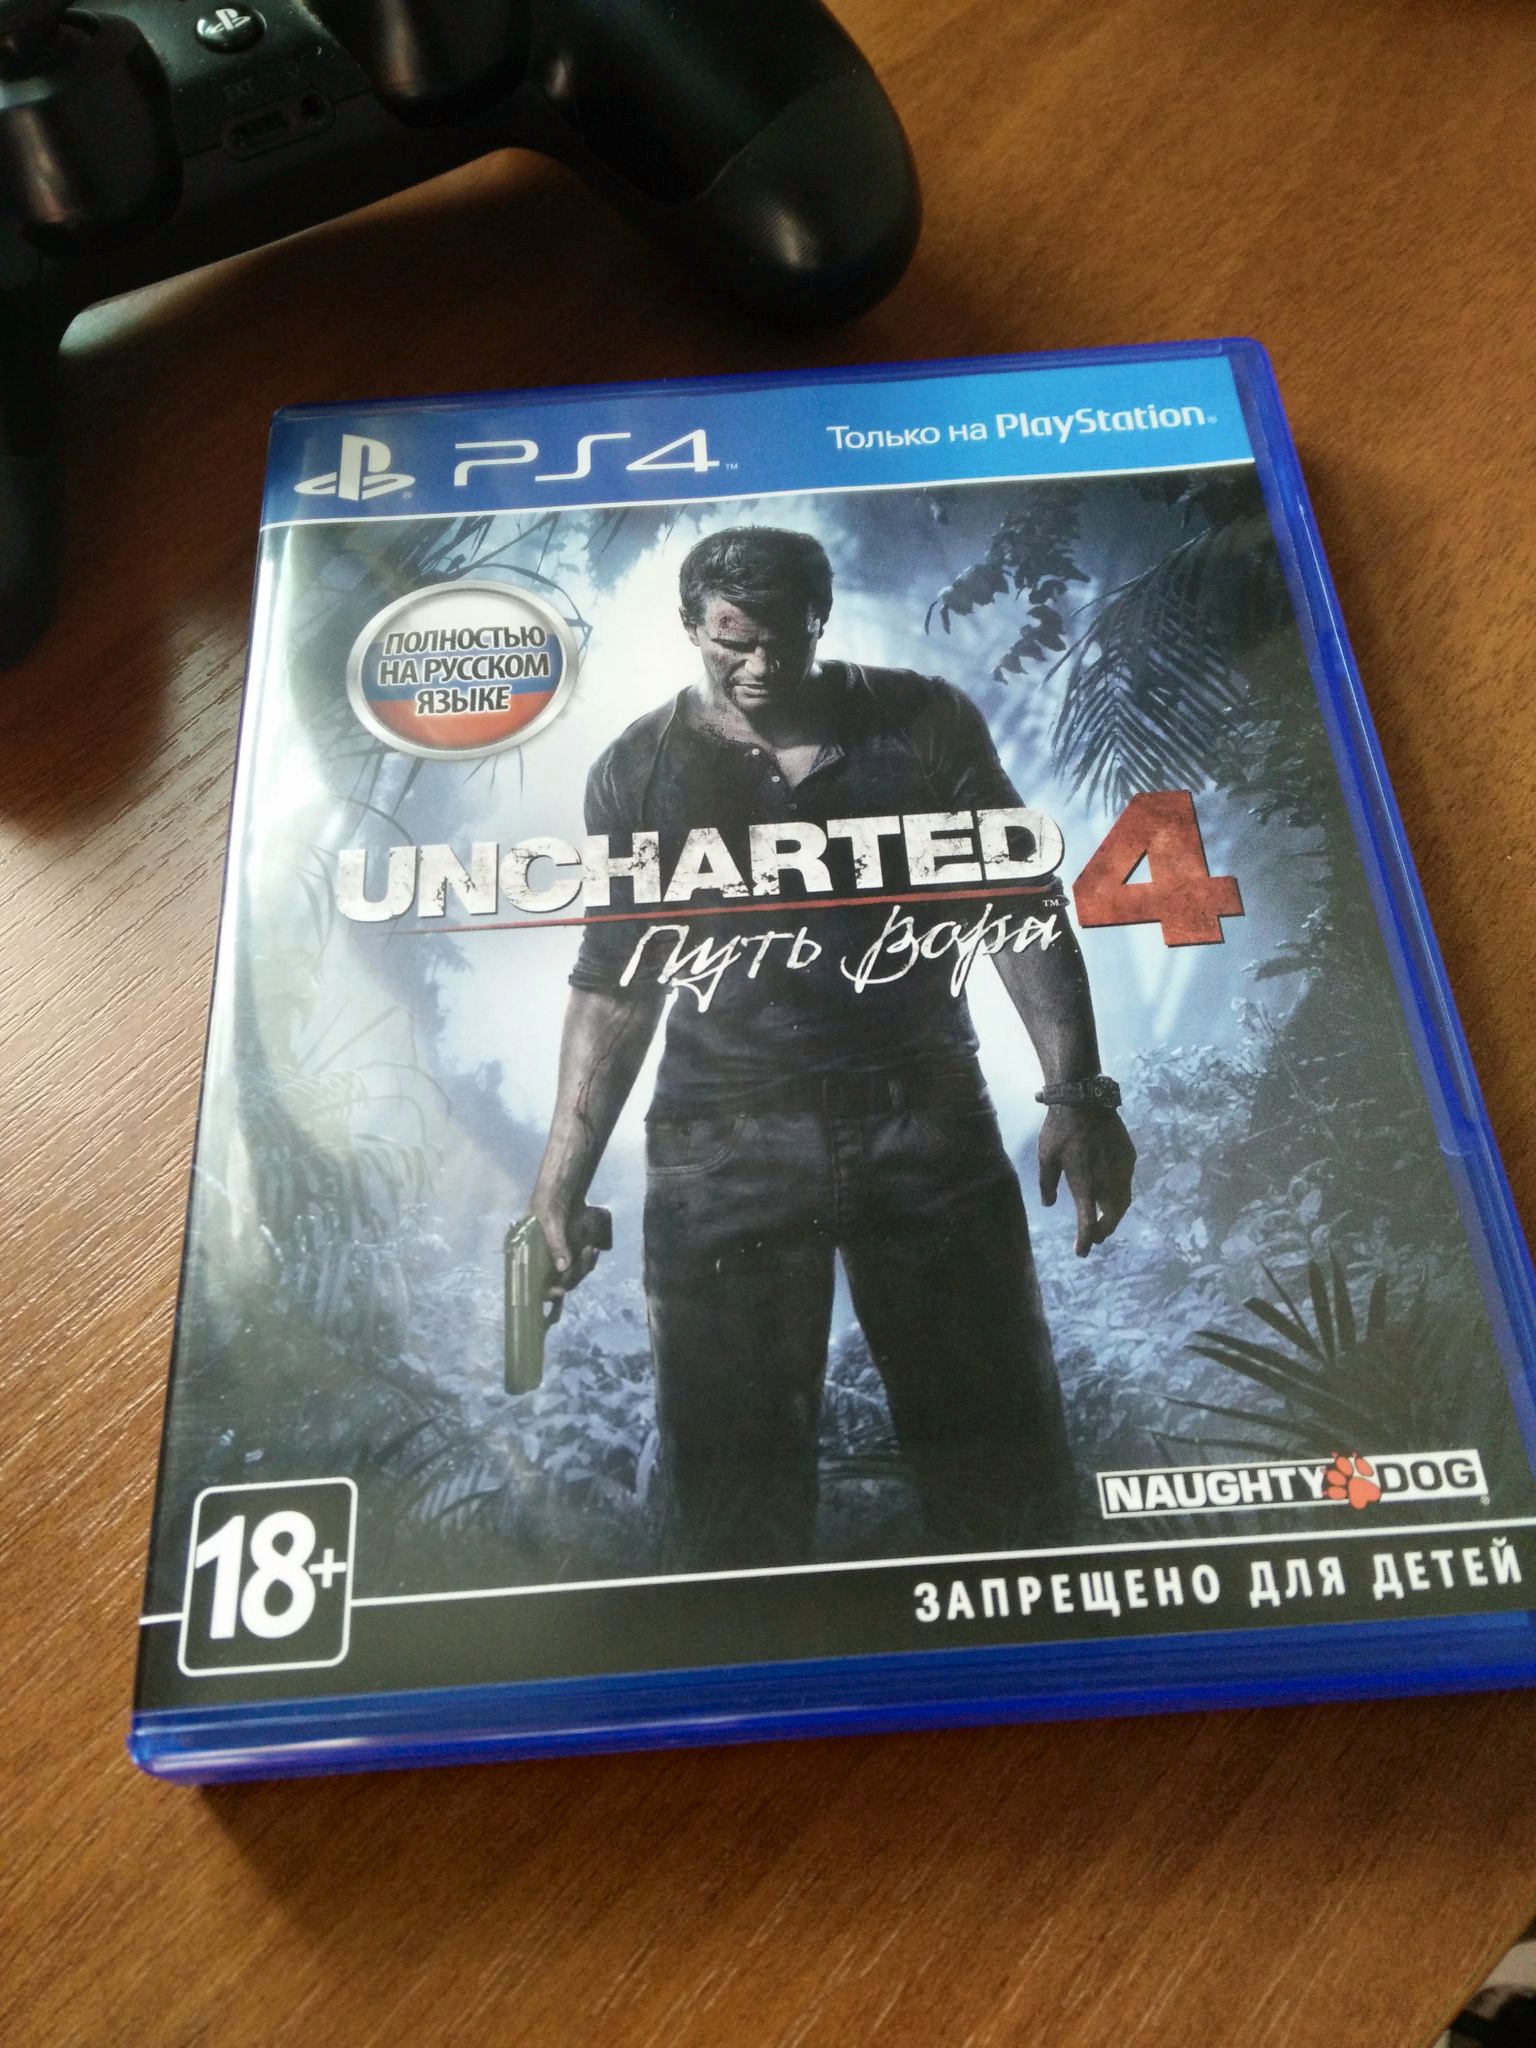 Playstation rus. Анчартед 4 диск пс4. Uncharted 4 ps4 диск. Uncharted 4 путь вора ps4 диск. Игра Uncharted 4 (ps4).